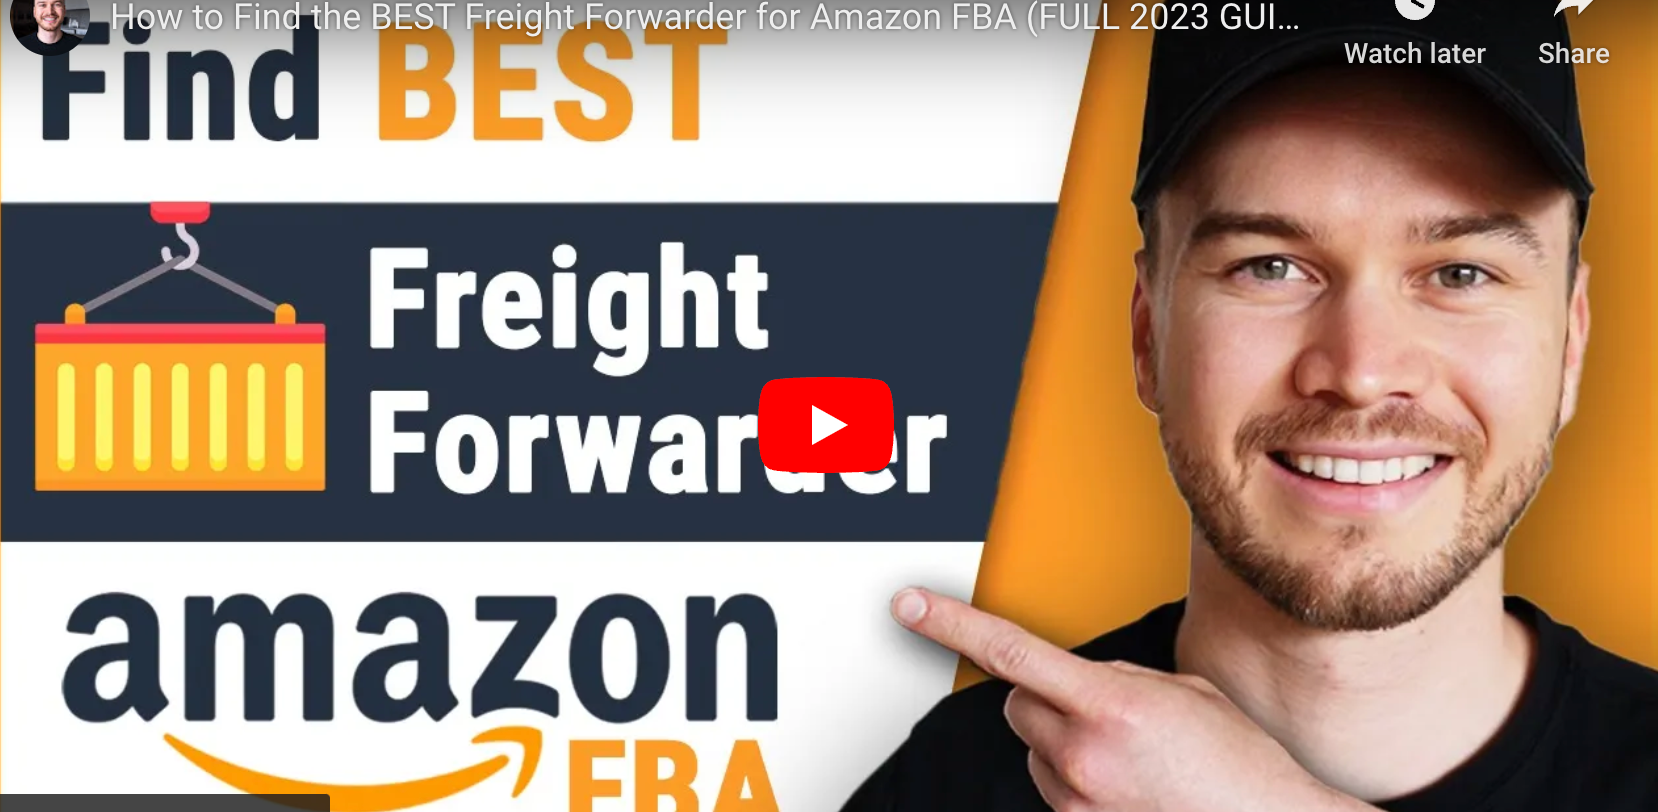 Maximizing Your E-Commerce Business with an FBA Freight Forwarder